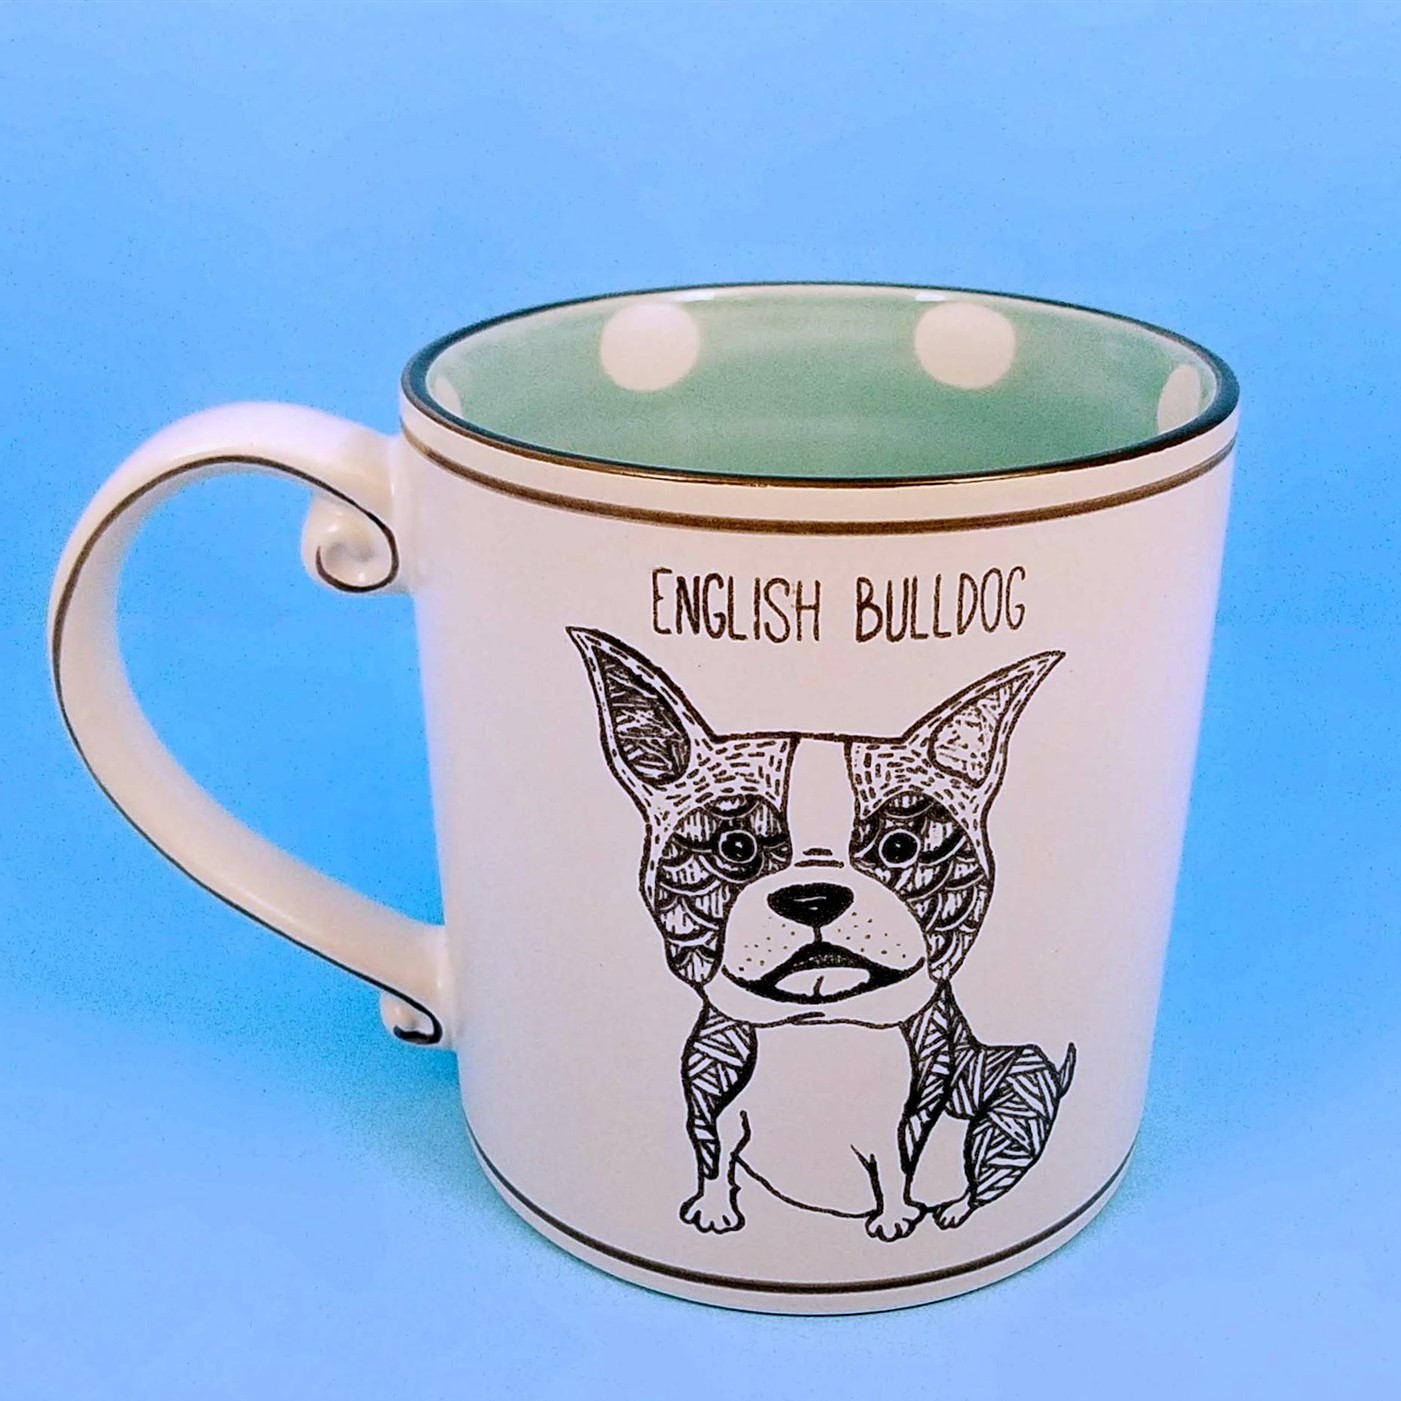 This English Bulldog Ceramic Coffee Mug Beverage Cup 21oz Spectrum Pen Pencil Holder is made with love by Premier Homegoods! Shop more unique gift ideas today with Spots Initiatives, the best way to support creators.